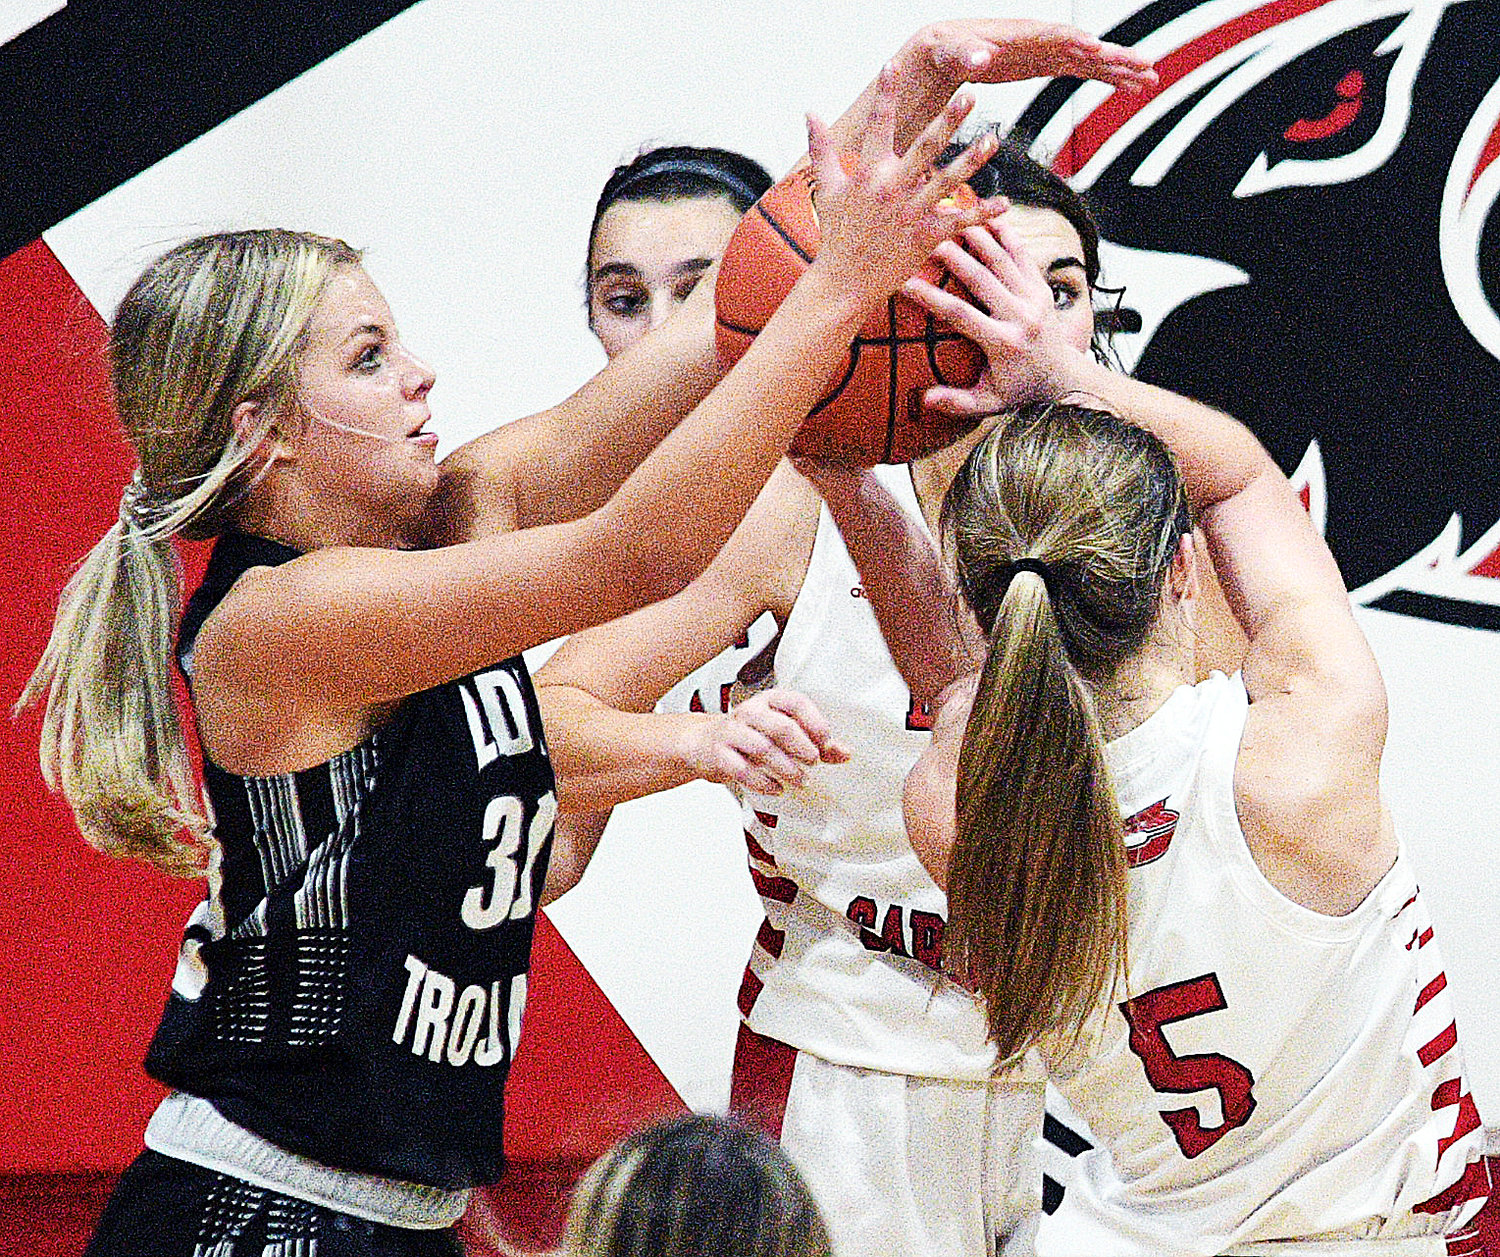 SPARTA’S BRYNN HOLT reaches to steal the ball away from Chadwick’s Raeleigh Little.